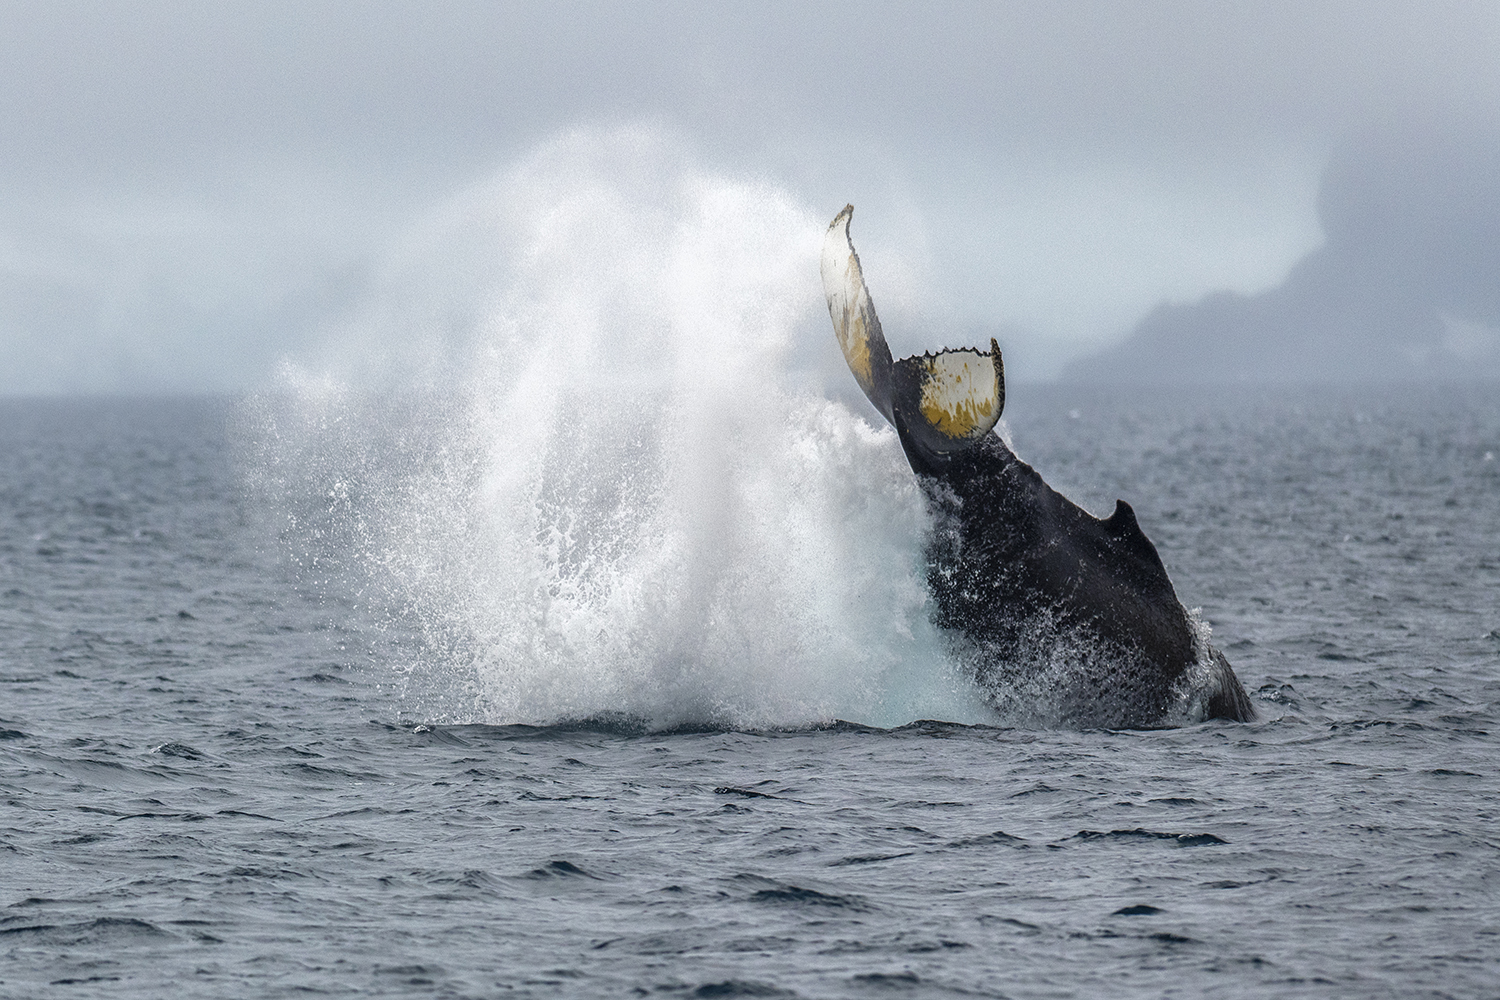 Humpback whale (Megaptera novaeangliae) breaching surface while feeding in Palmer Archipelago, between Anvers Island and the Antarctic Peninsula. Antarctic krill provide a vital food source not only for the penguins but also for whales, seals and ice fish.